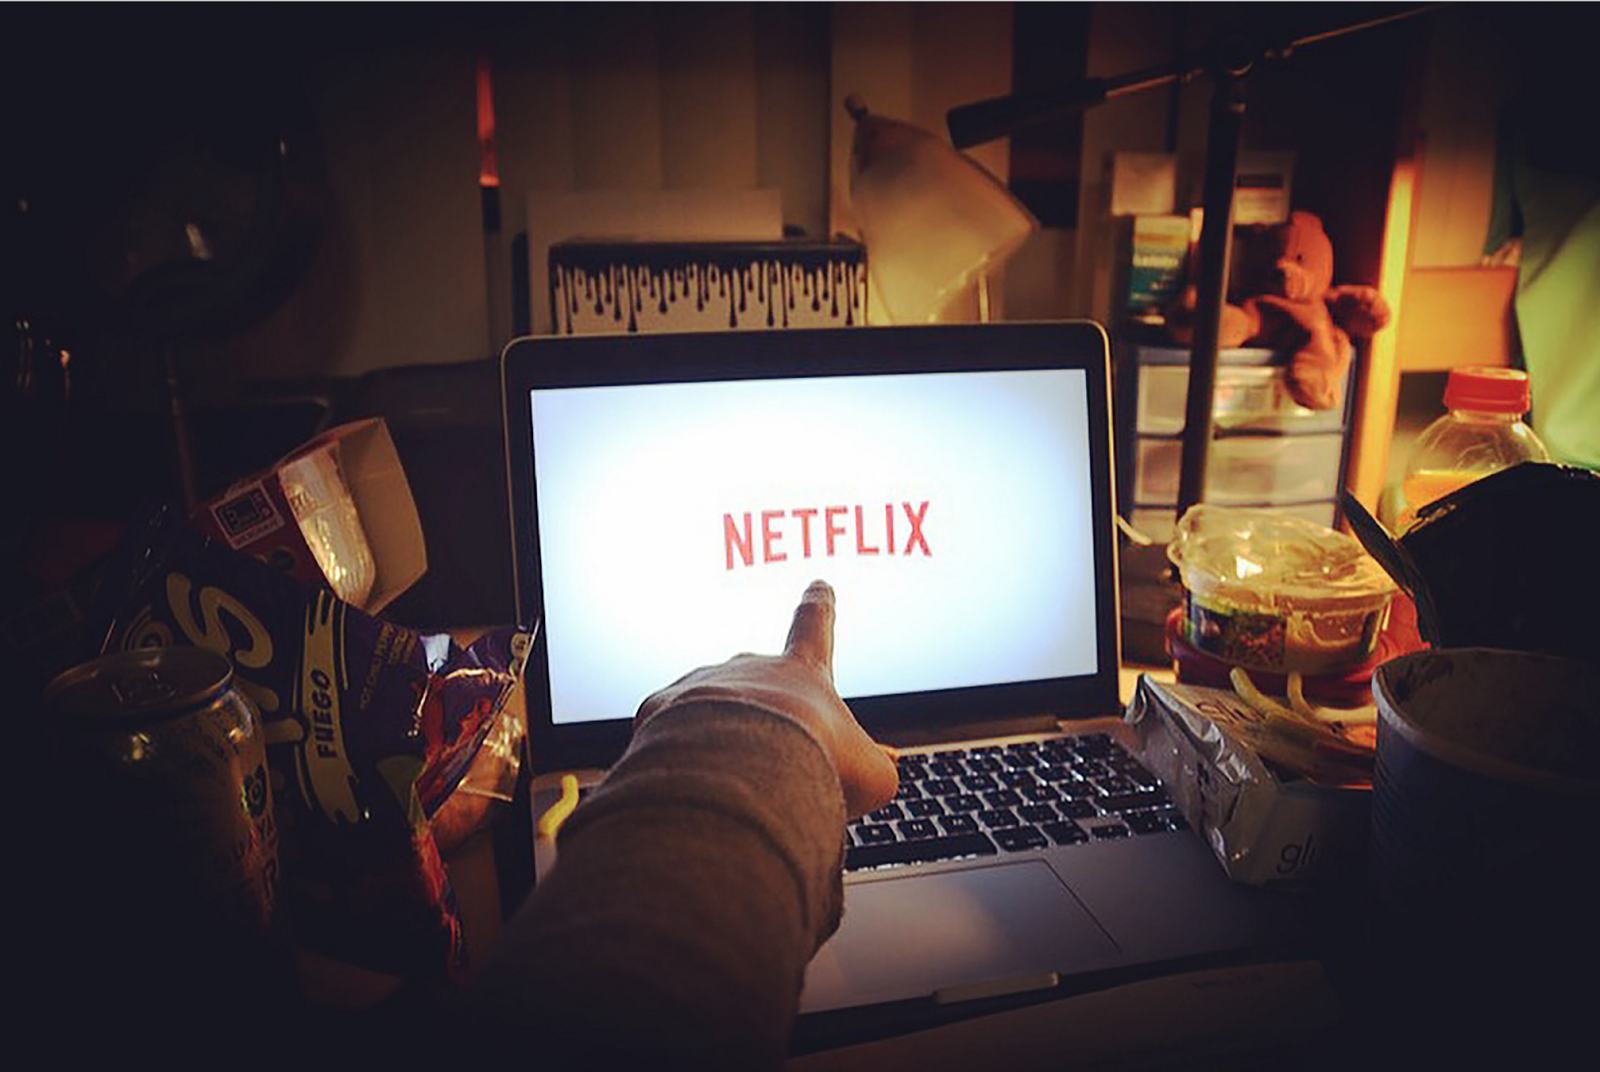 Pepperdine students who over indulge in binge-watching Netflix can disconnect from the world around them. (Photo illustration by Sofía Telch)